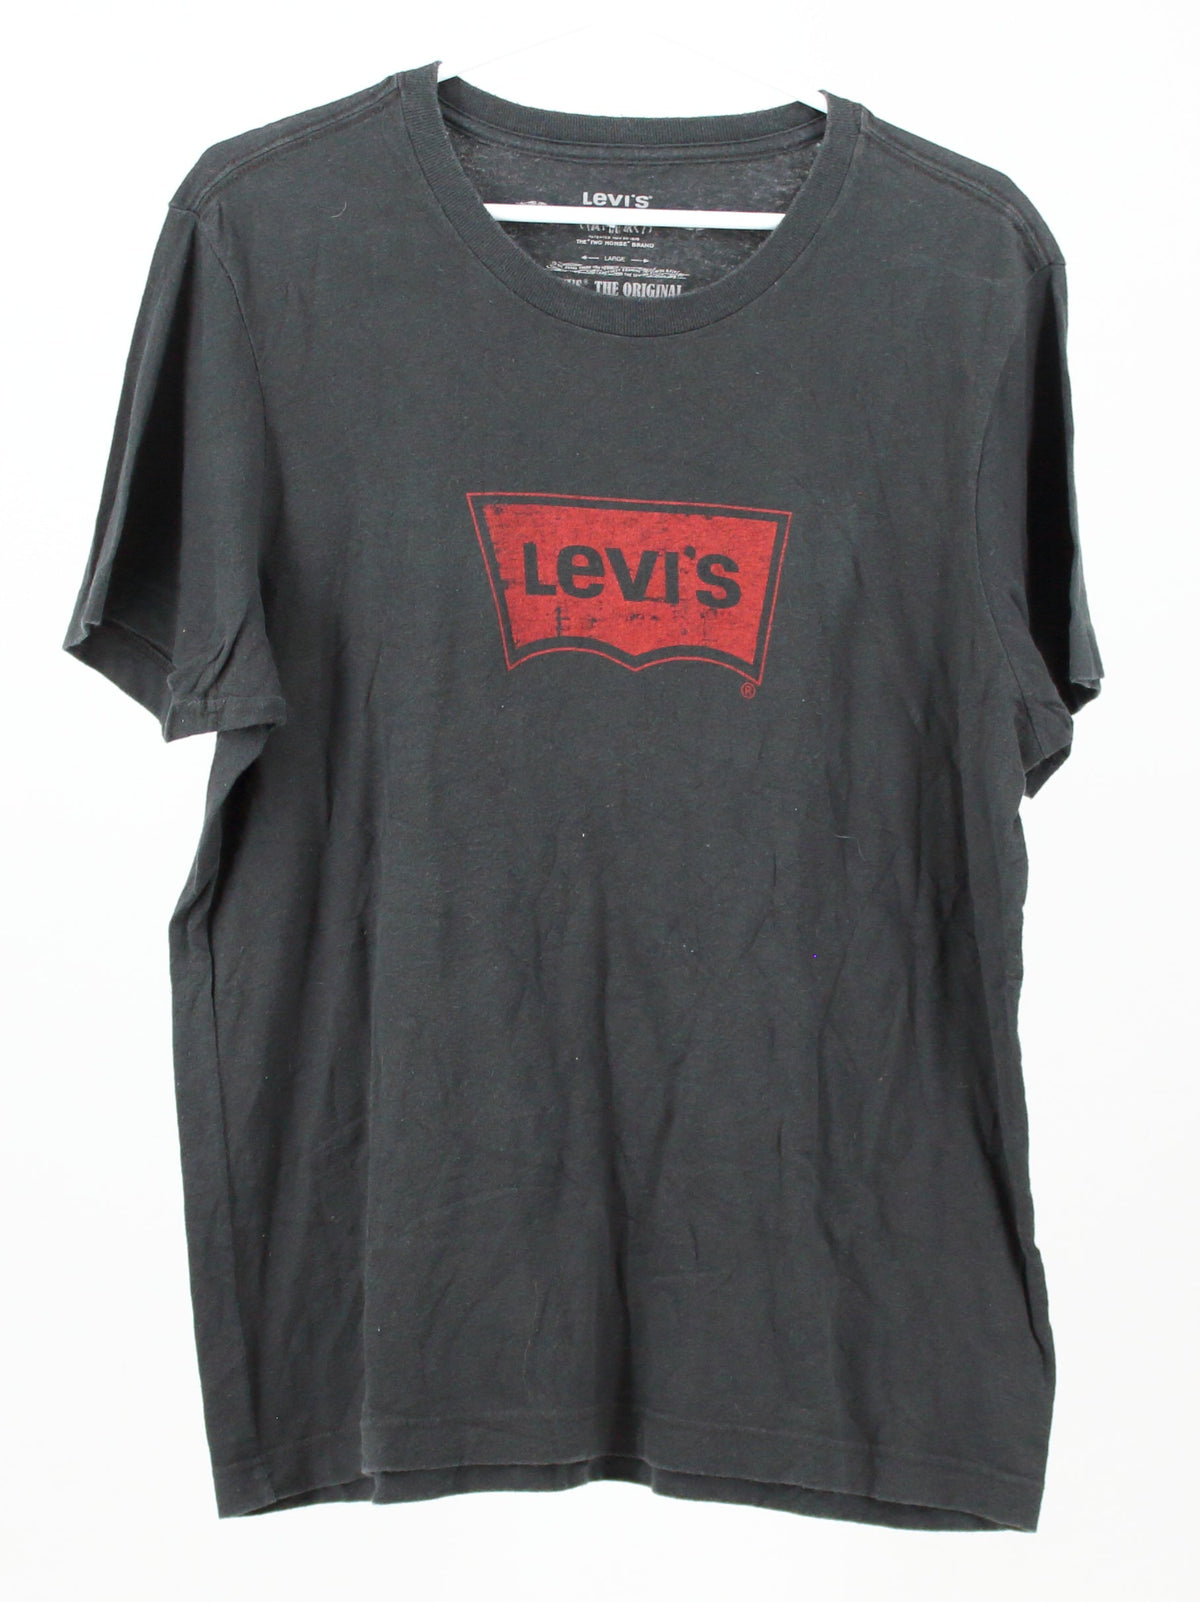 Levis Basic Black and Red Logo Tee